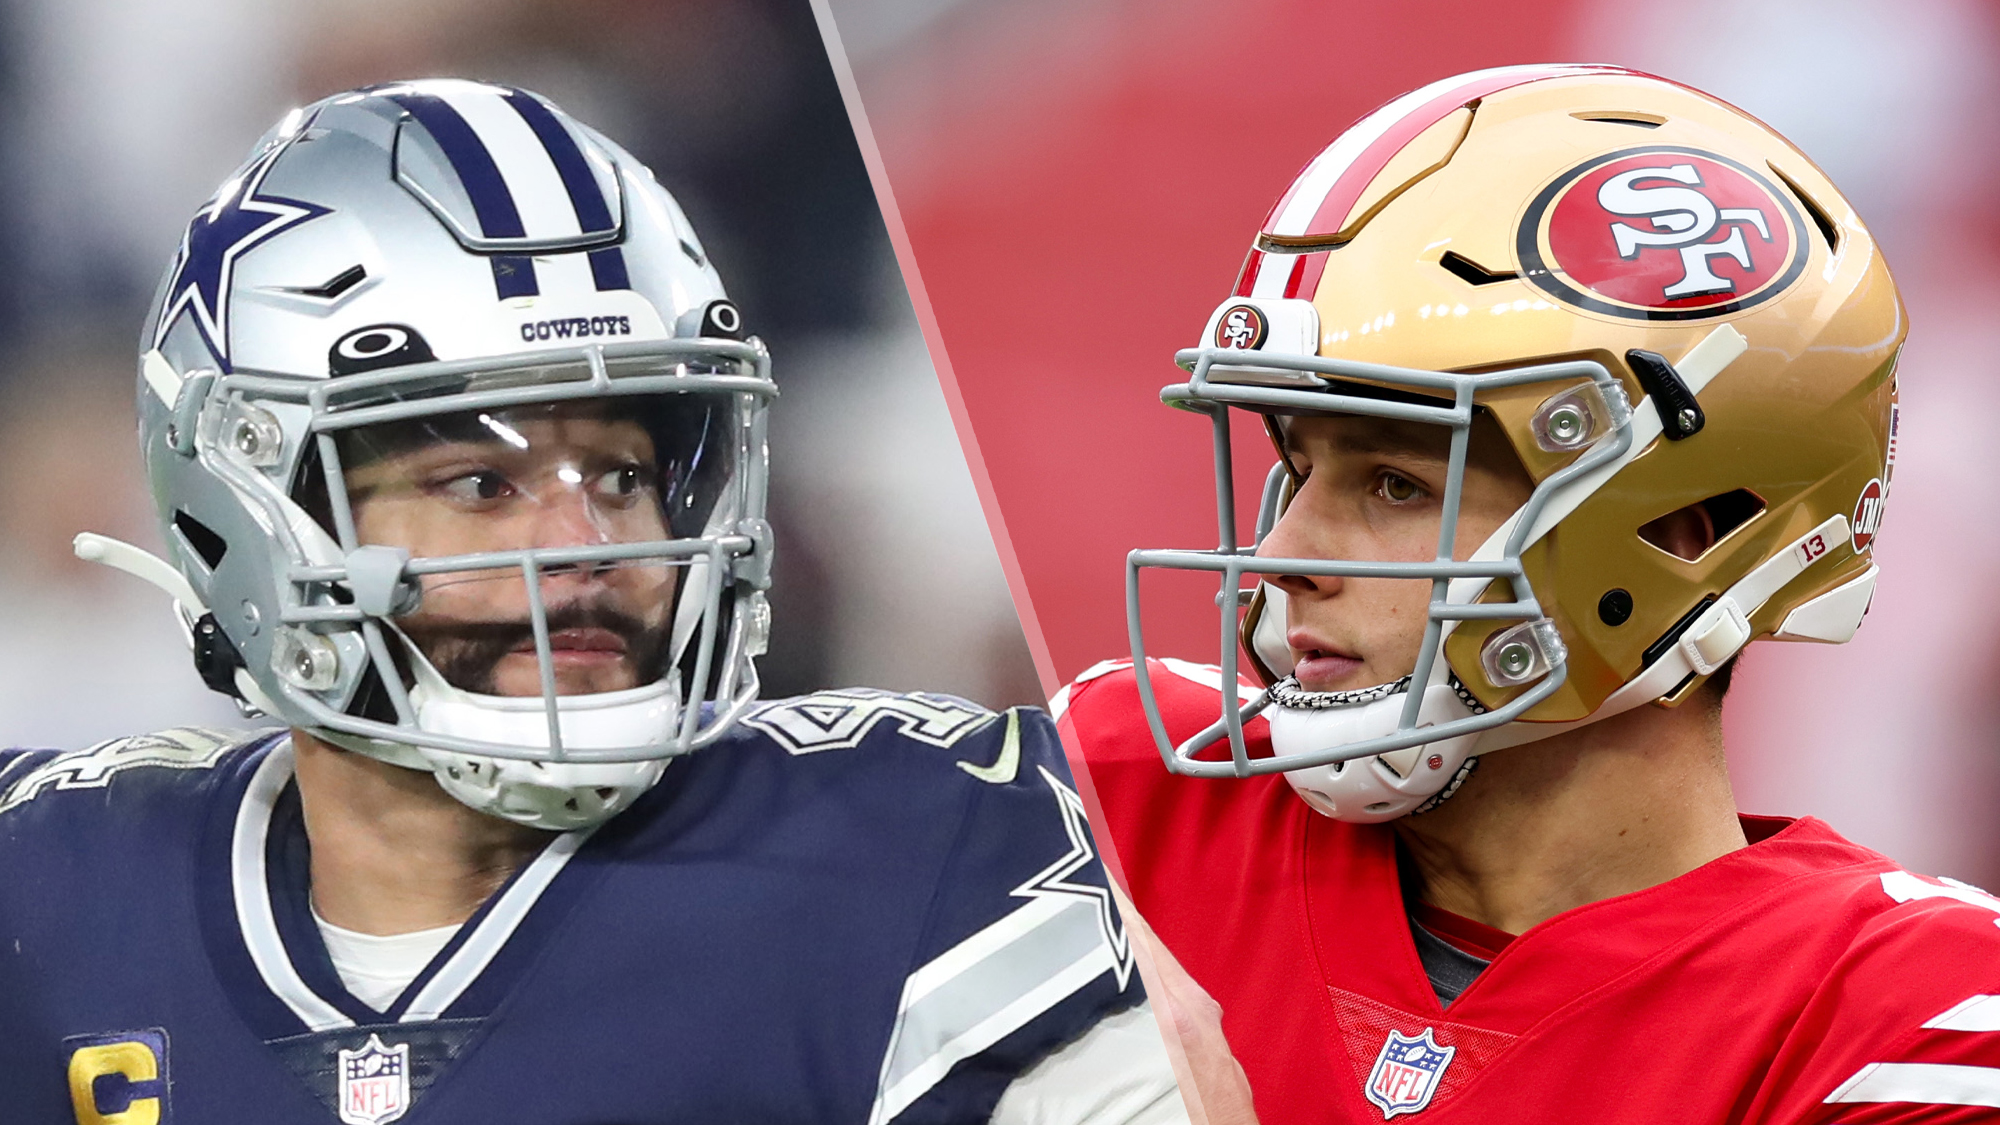 Cowboys vs 49ers live stream: How to watch Divisional game of the